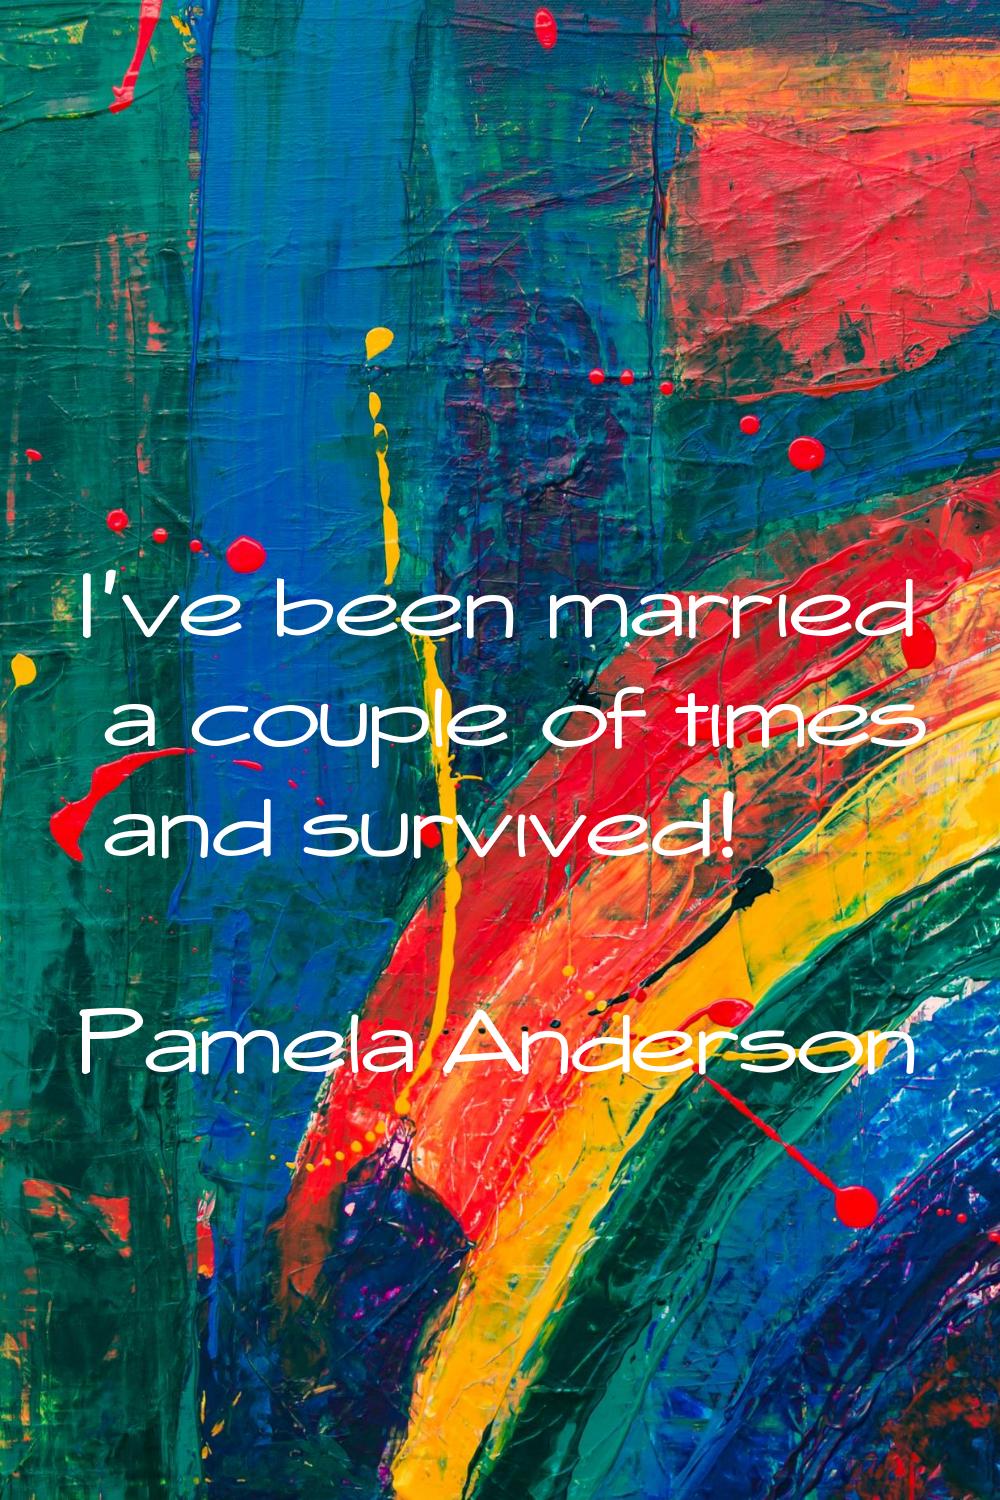 I've been married a couple of times and survived!